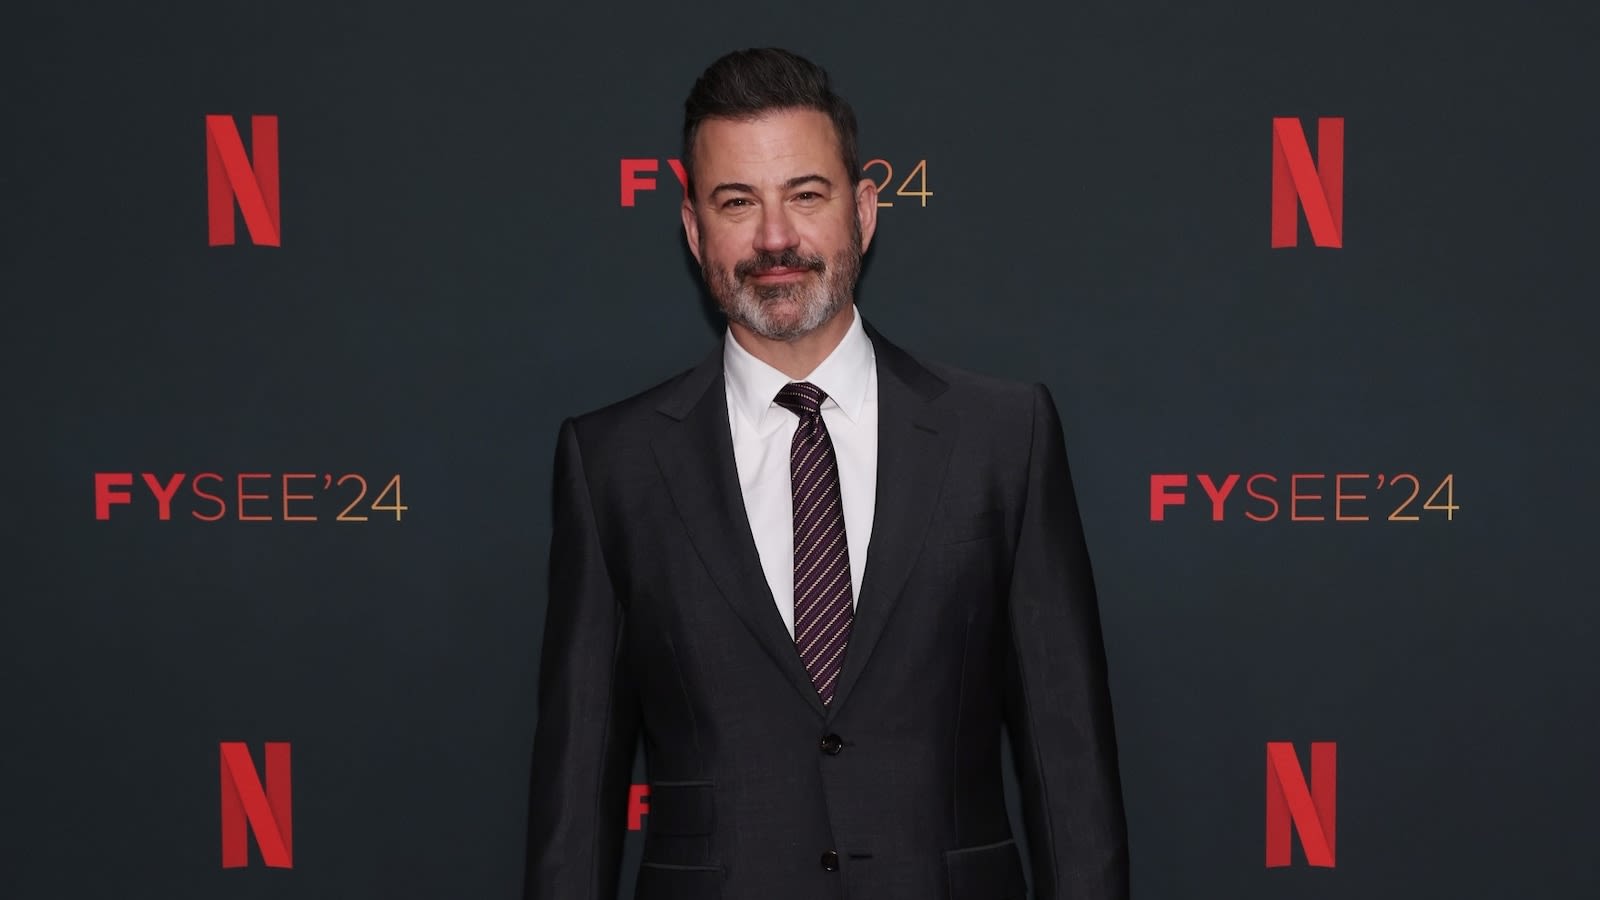 Surgeon who performed open heart surgeries on Jimmy Kimmel’s son speaks out